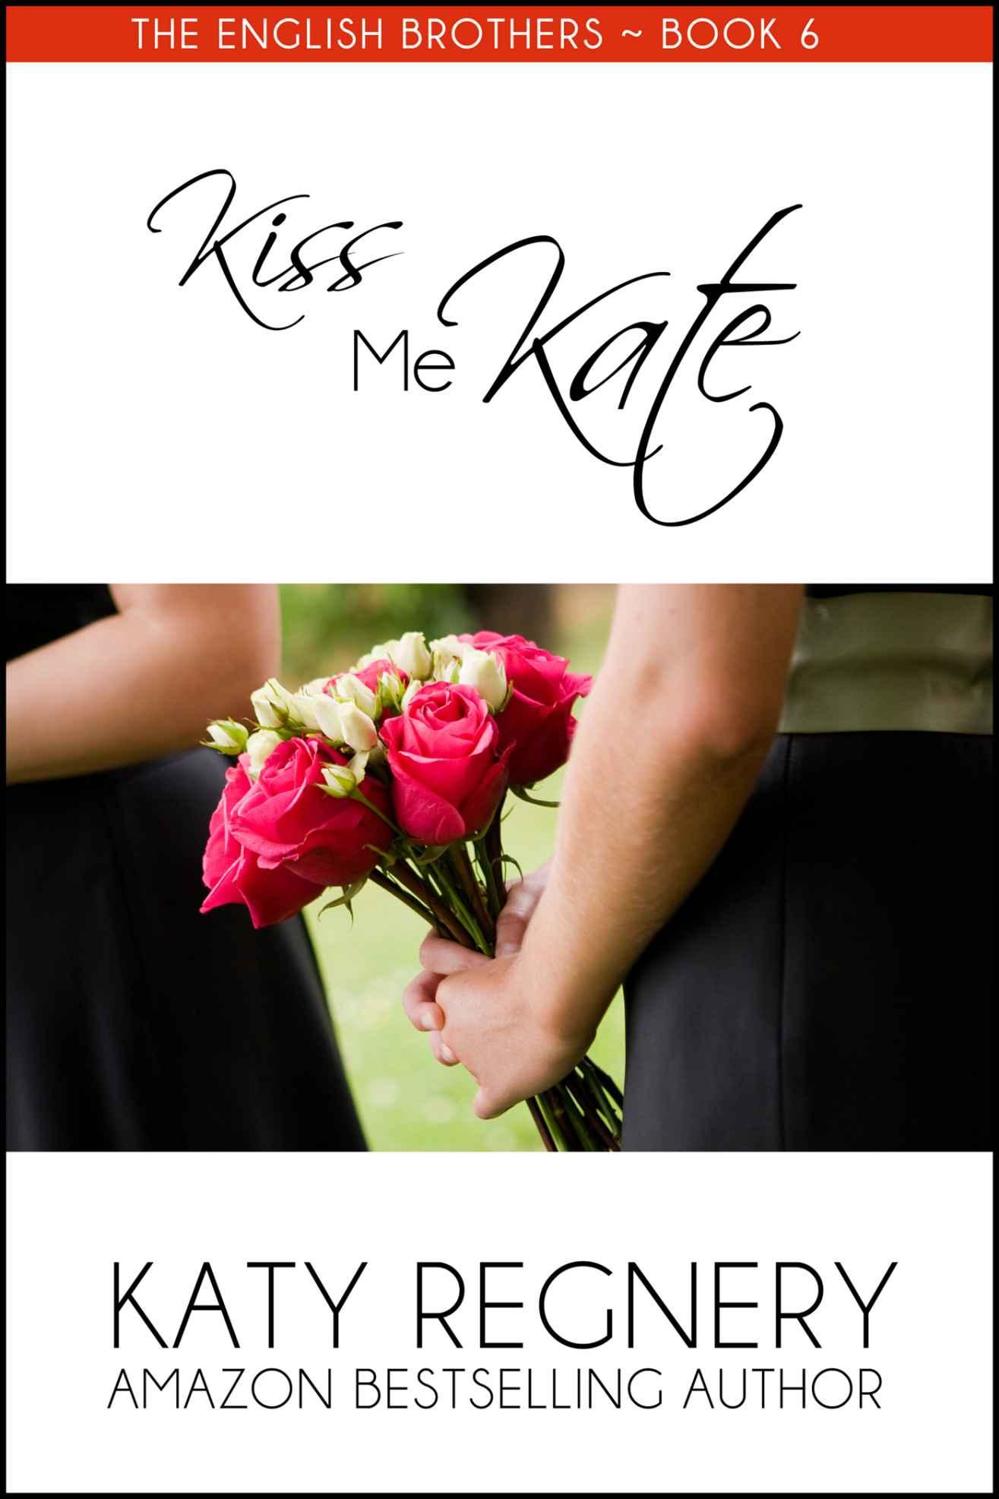 Kiss Me Kate (The English Brothers Book 6) by Katy Regnery